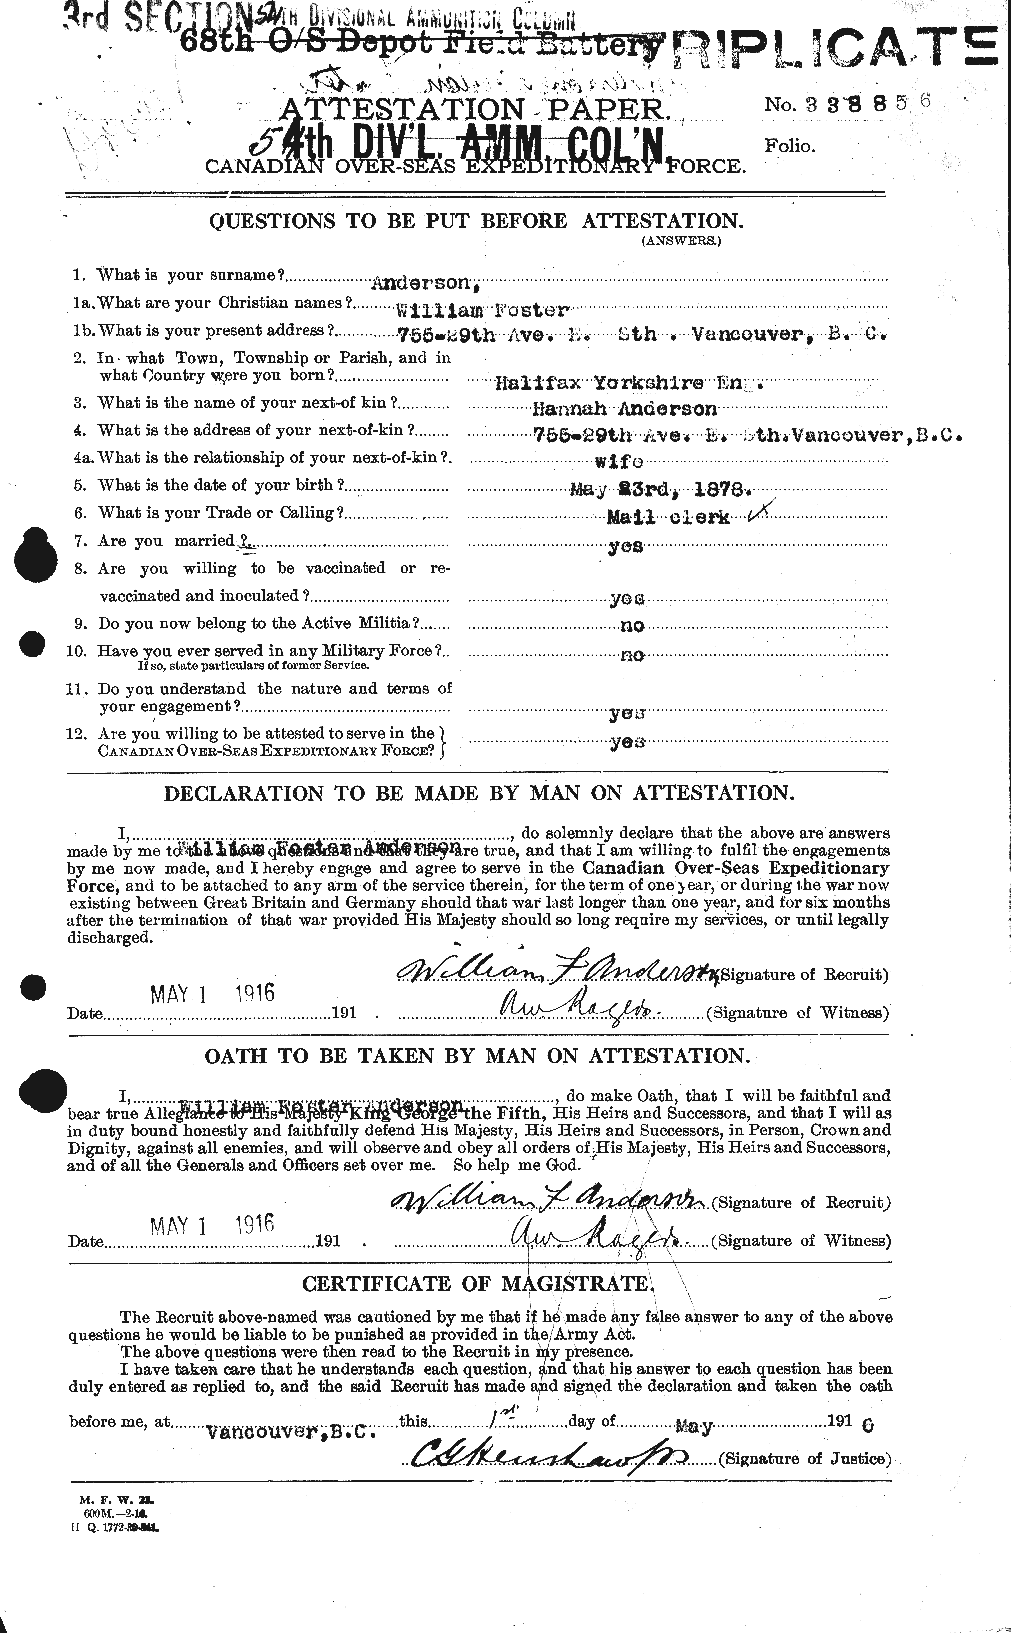 Personnel Records of the First World War - CEF 210794a